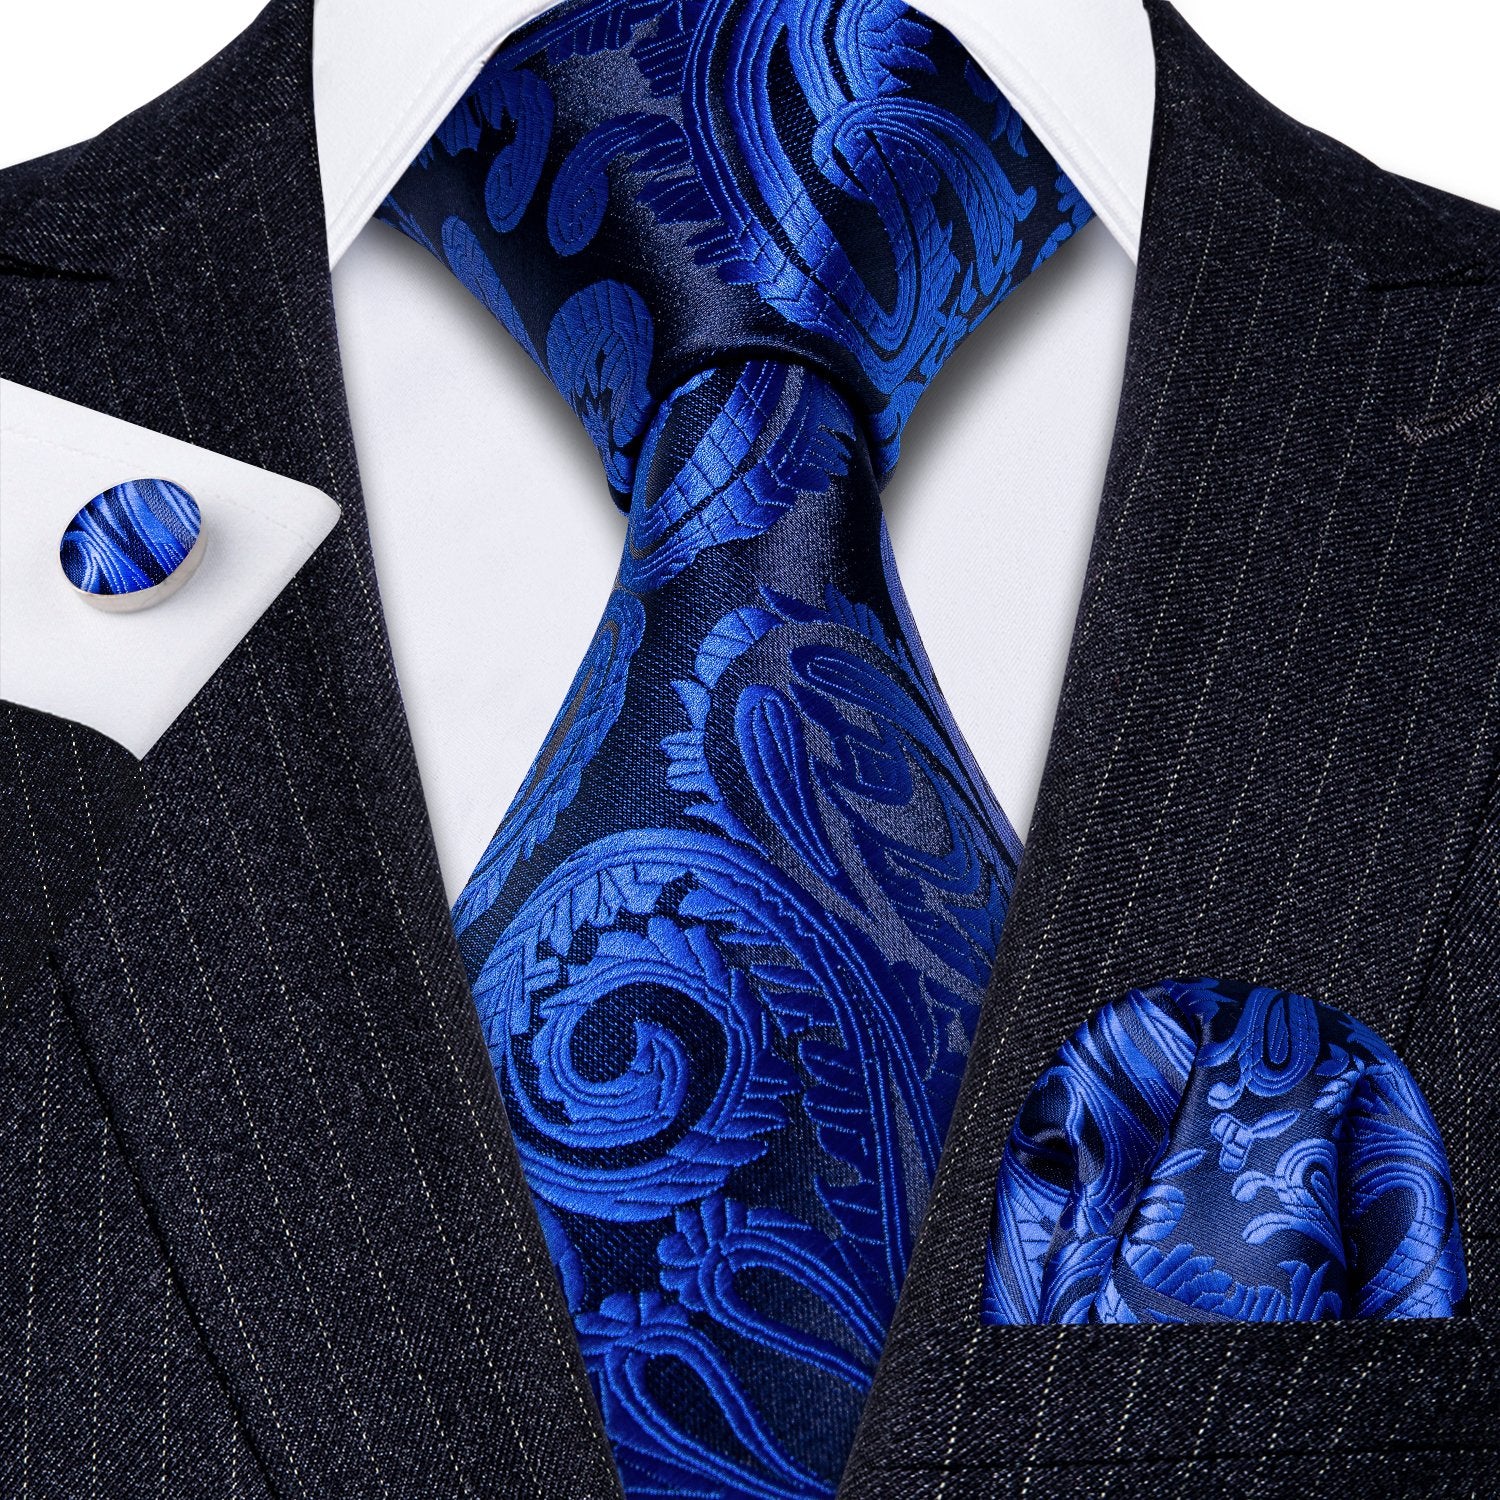 Luxury Blue Paisley Scarf with Tie Set